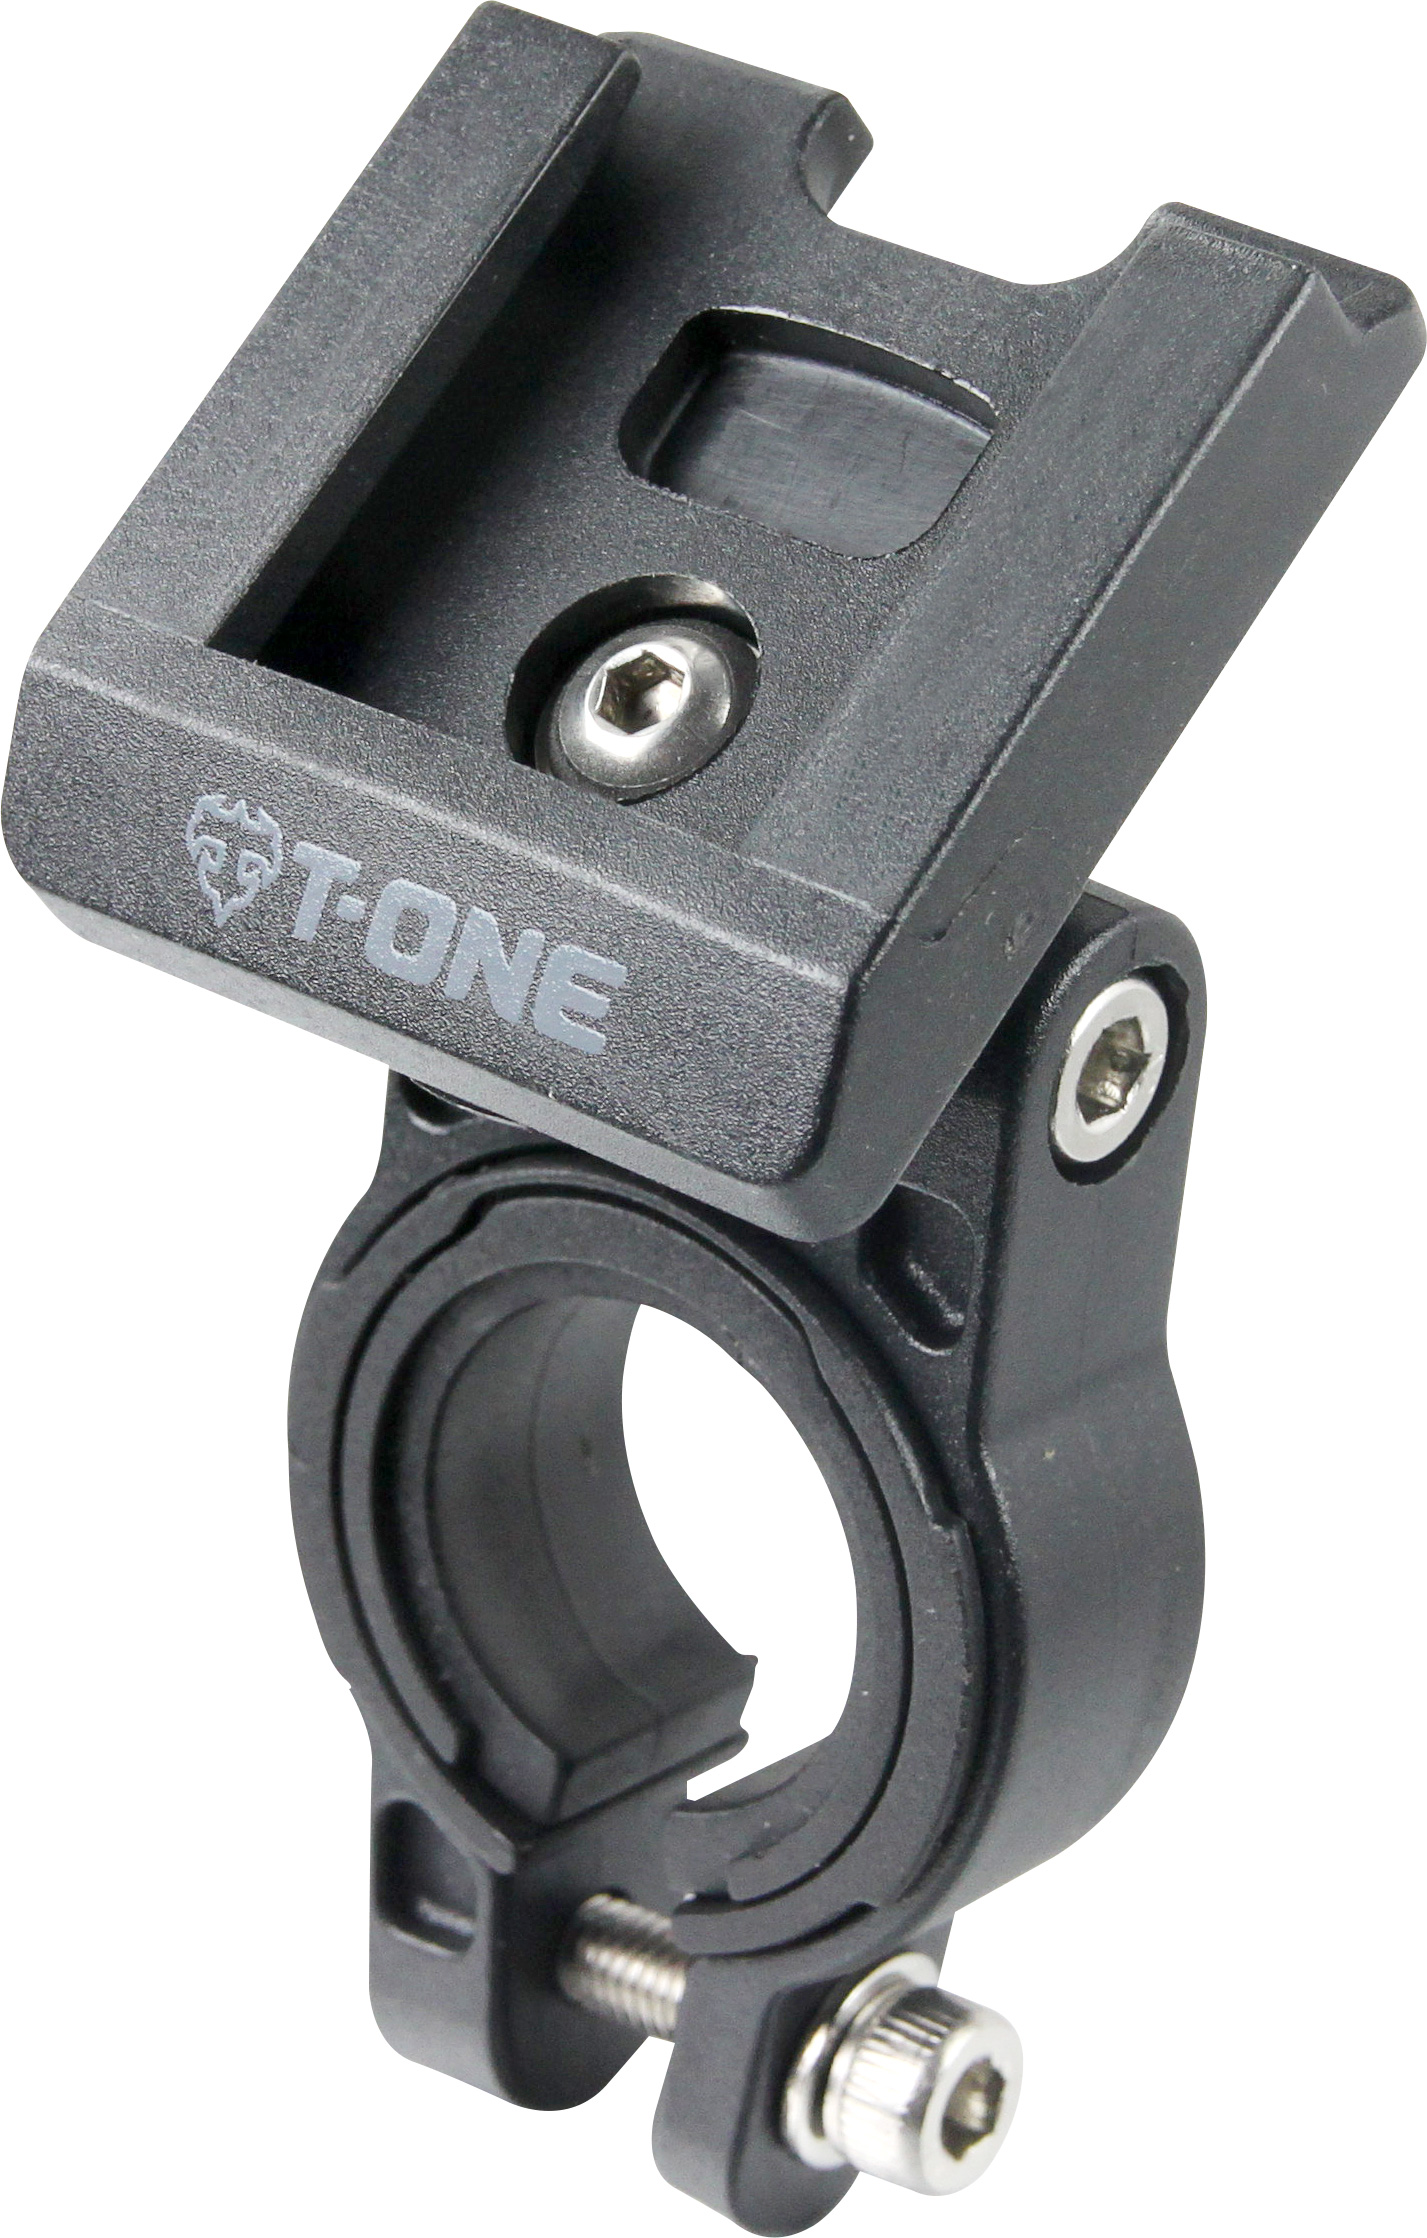 T-HW07 T-One Shift Stem Cleat System